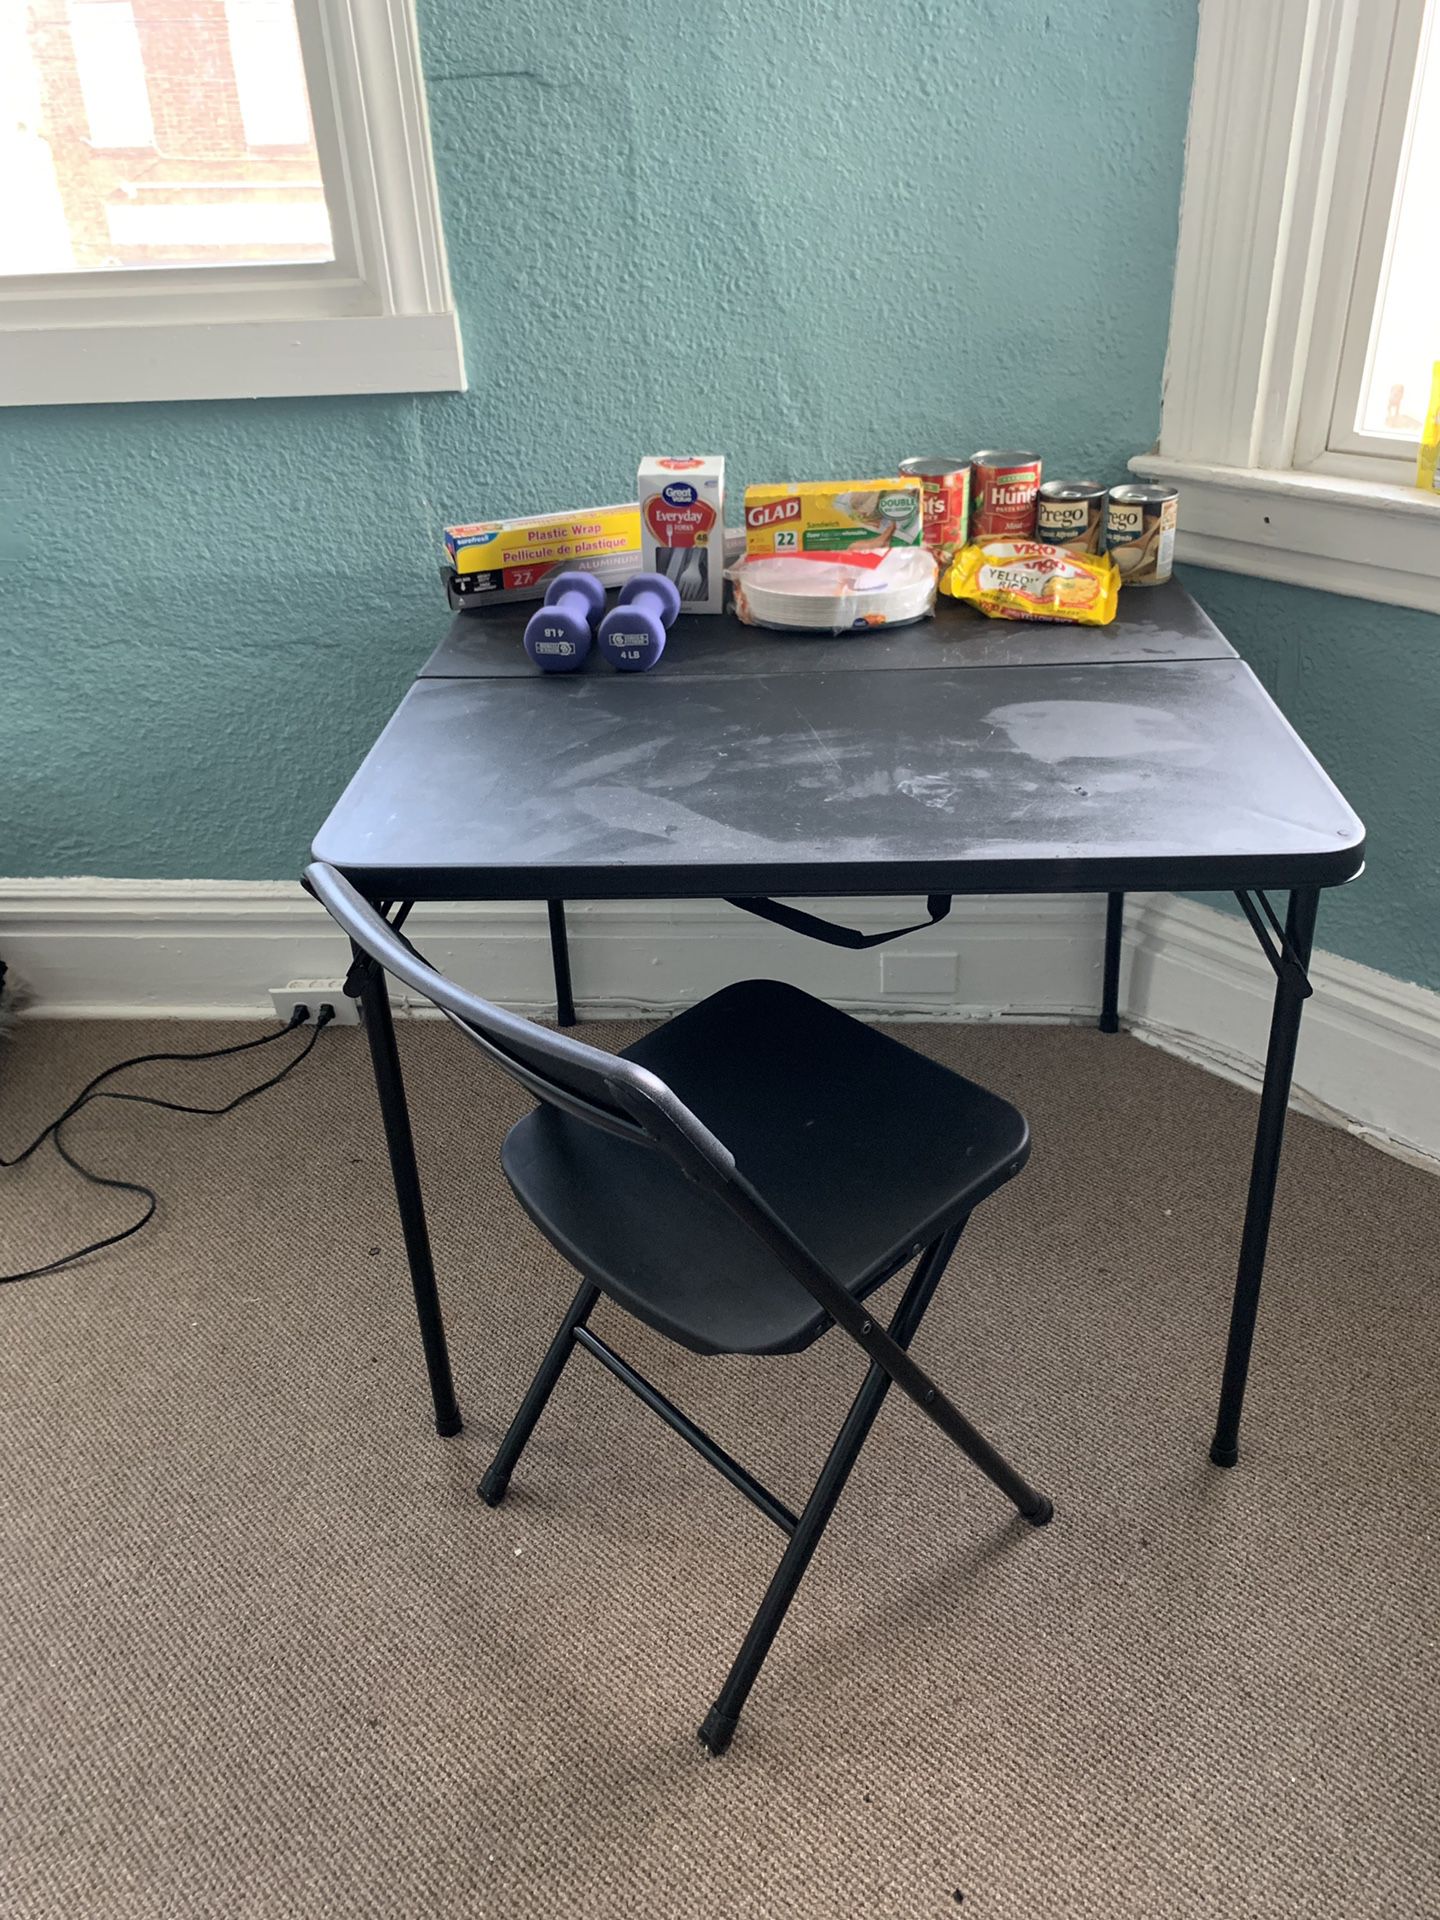 Table + chair & other items